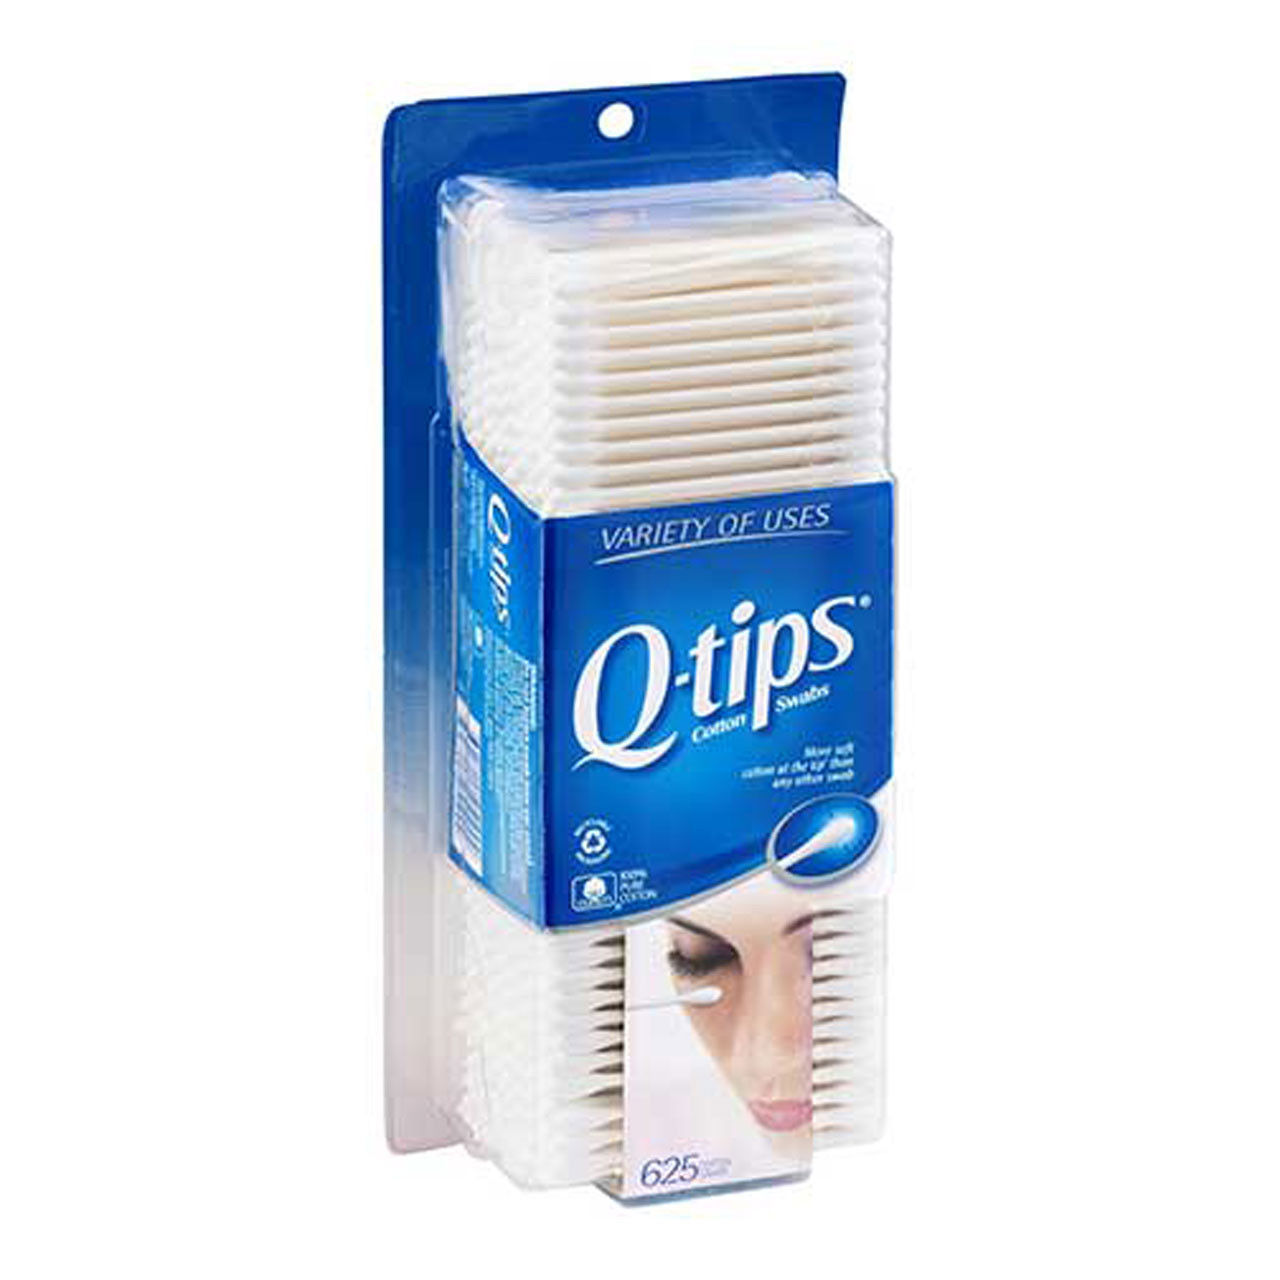 What are some interesting facts about Q-tips?